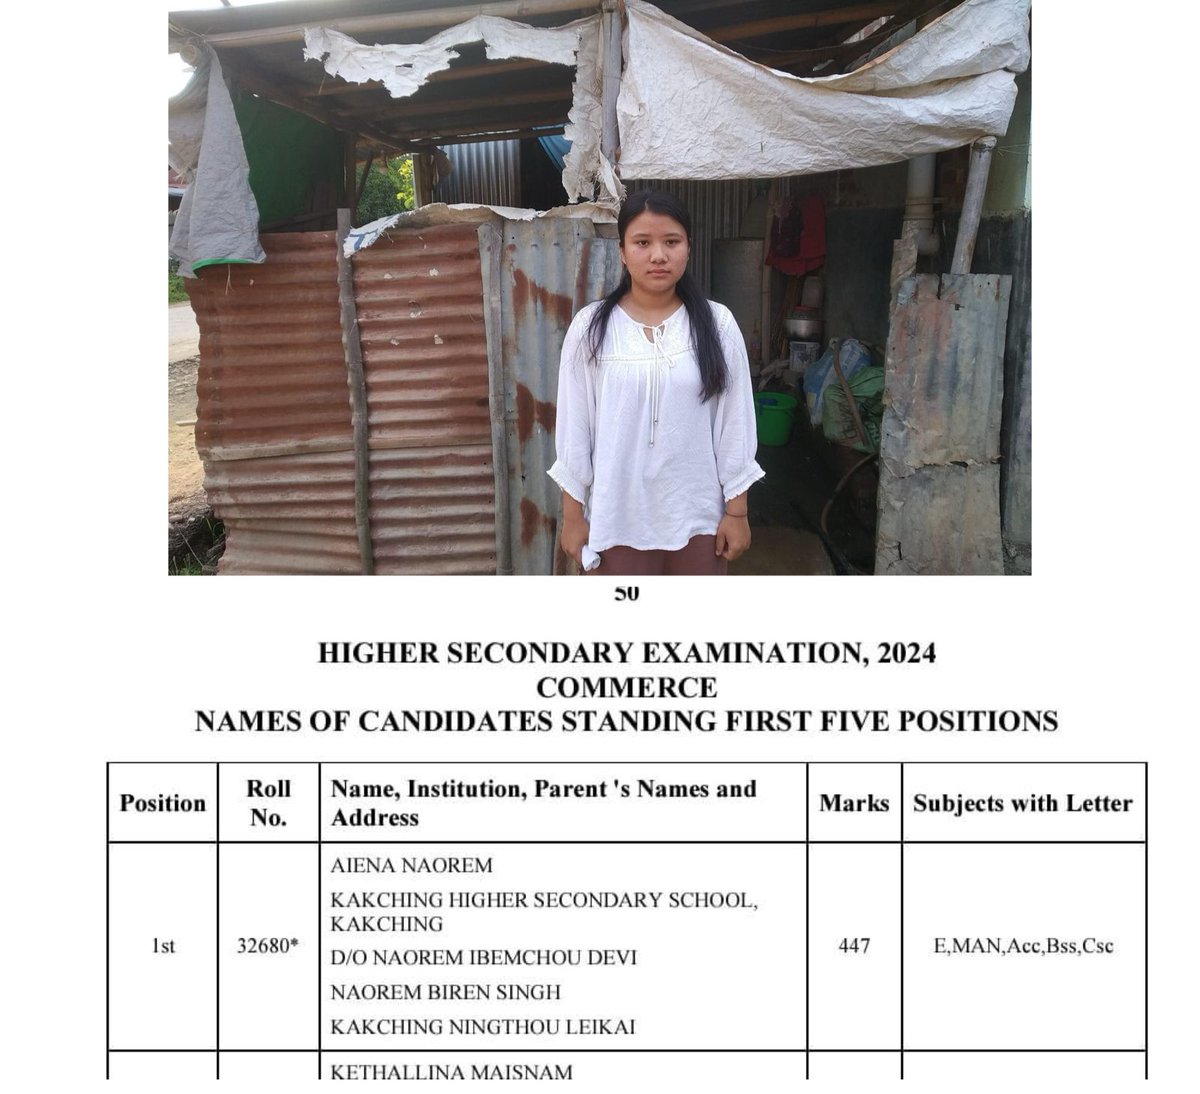 '🎉 Proud moment! Aiena Naorem clinches 1st place in Higher Secondary Examination 2024 (Commerce) from Kakching Higher Secondary School. Daughter of Naorem Biren Singh & Naorem Ibemchou Devi. #TopOfTheClass #SuccessStory #ProudParents'